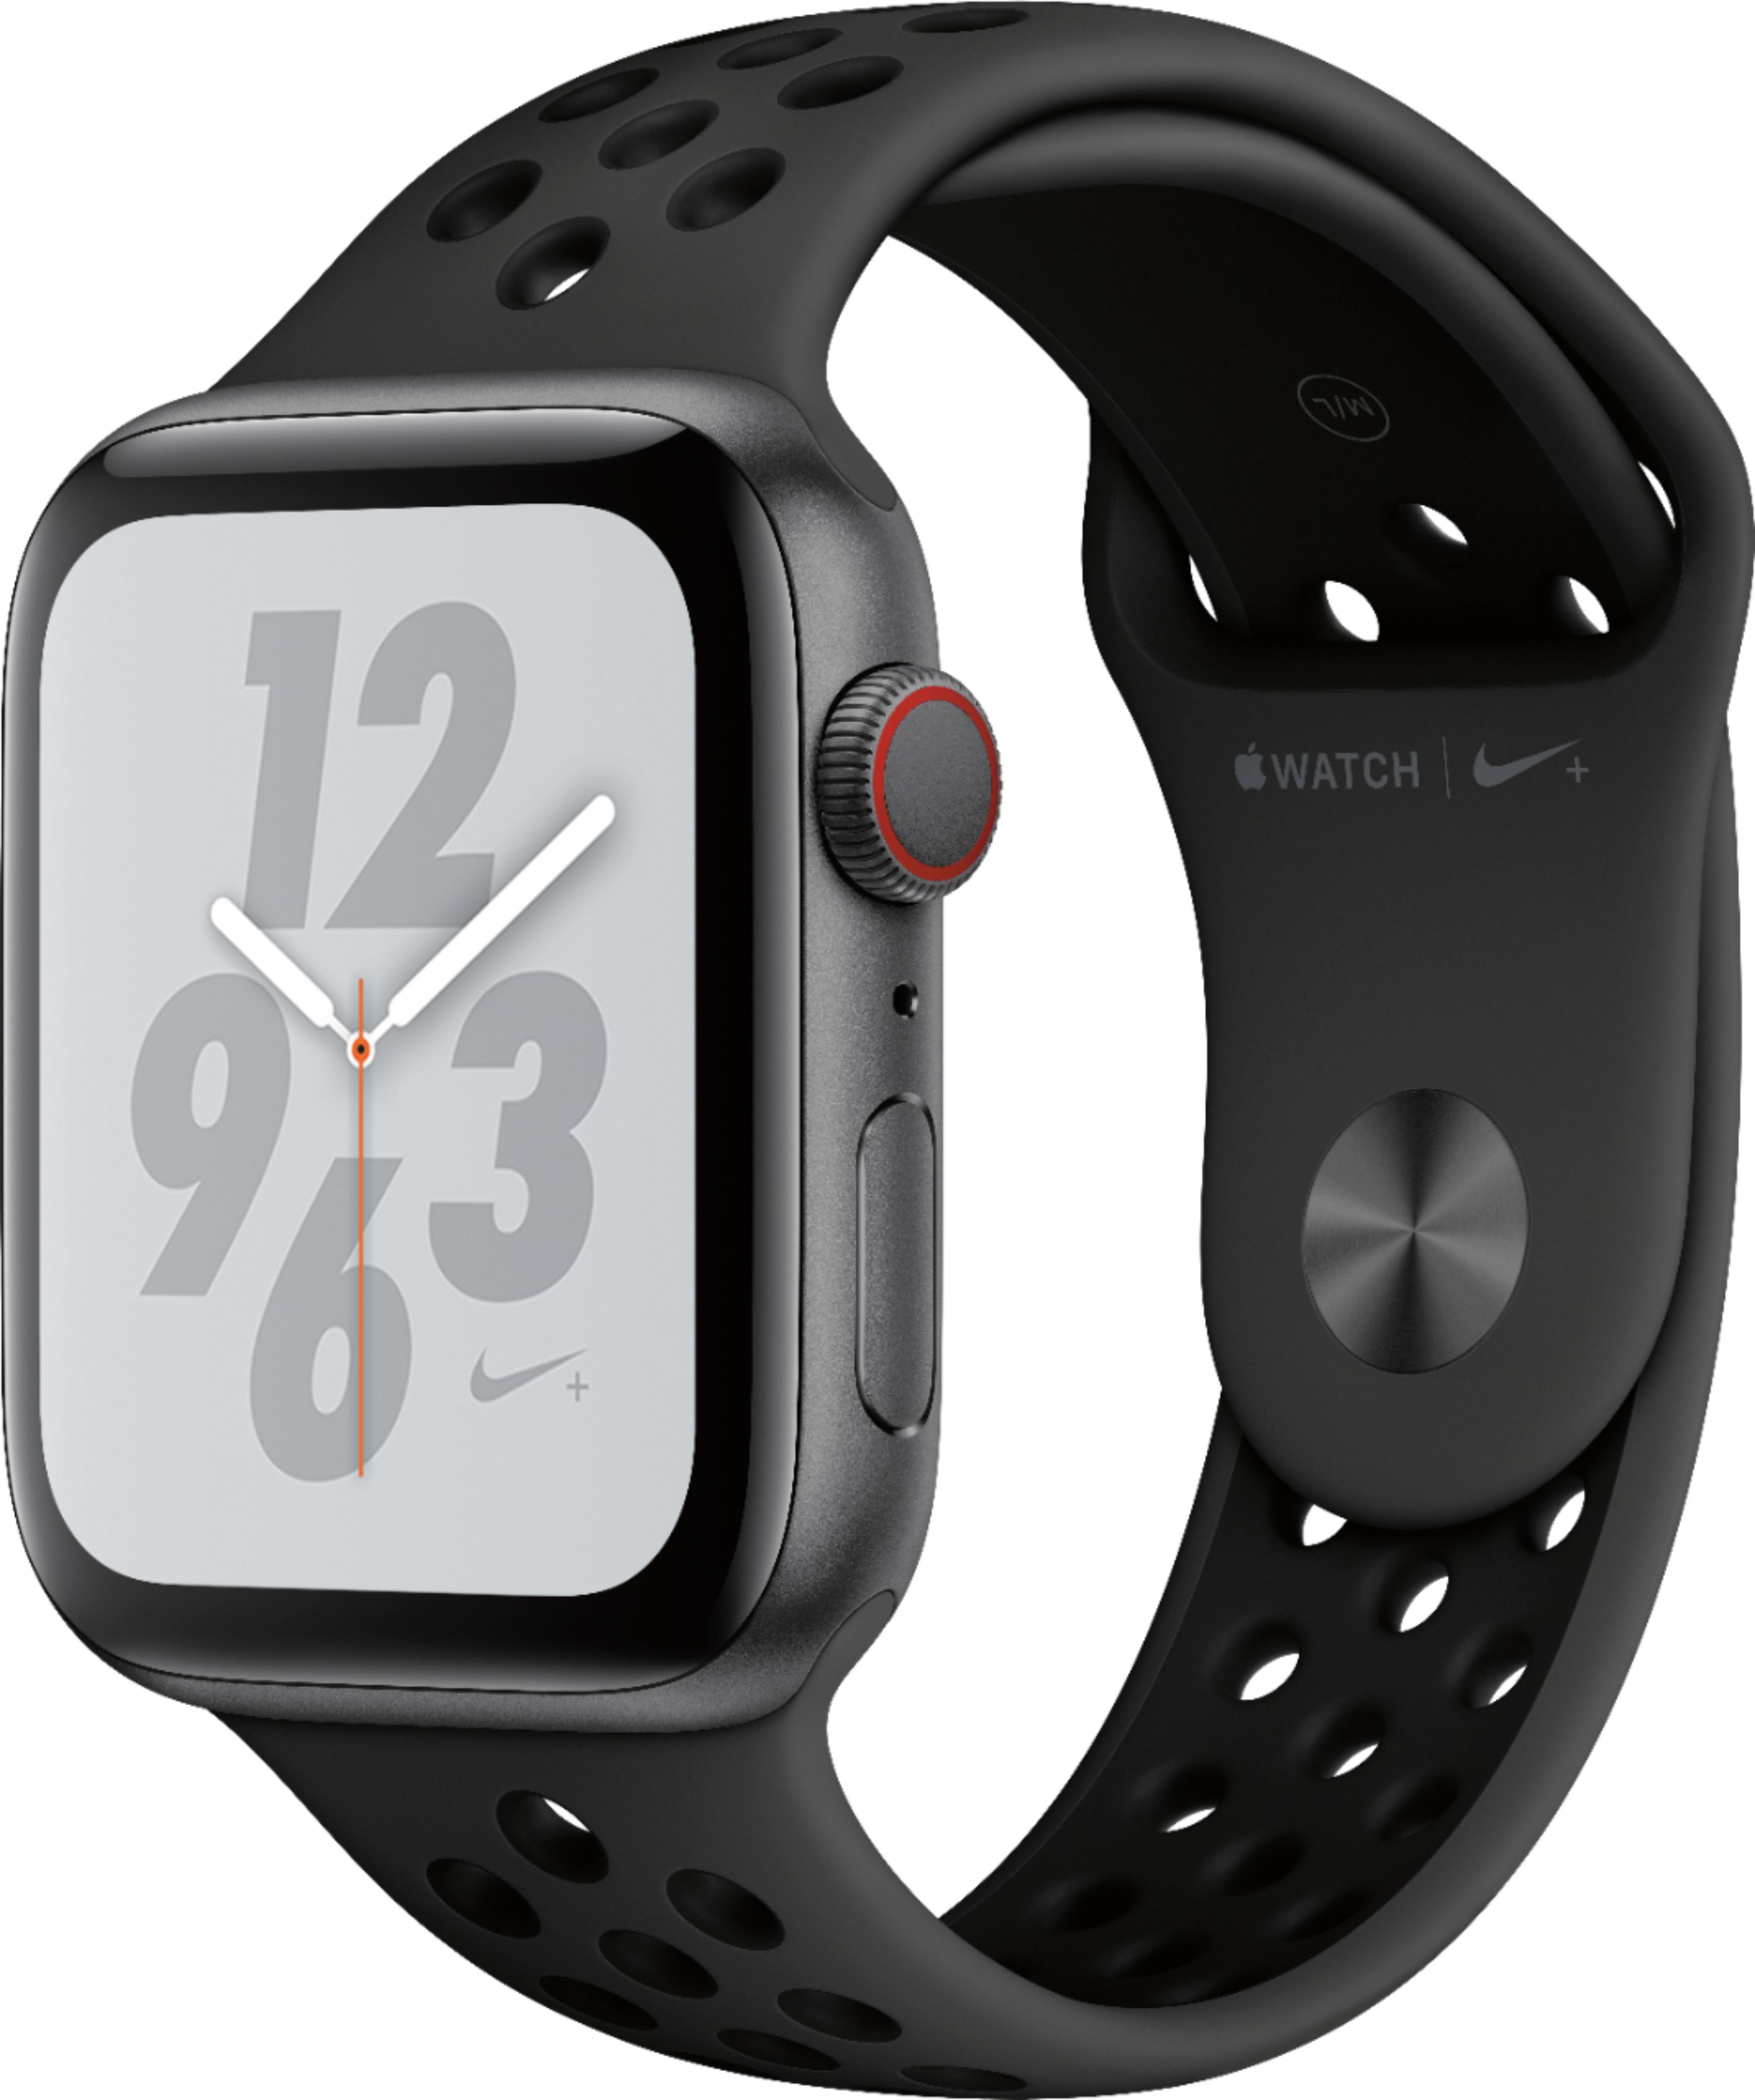 Best Buy: Apple Watch Nike+ 4 (GPS + Cellular) 44mm Space Gray Aluminum Case with Anthracite/Black Nike Band Space Gray Aluminum (AT&T) MTXE2LL/A